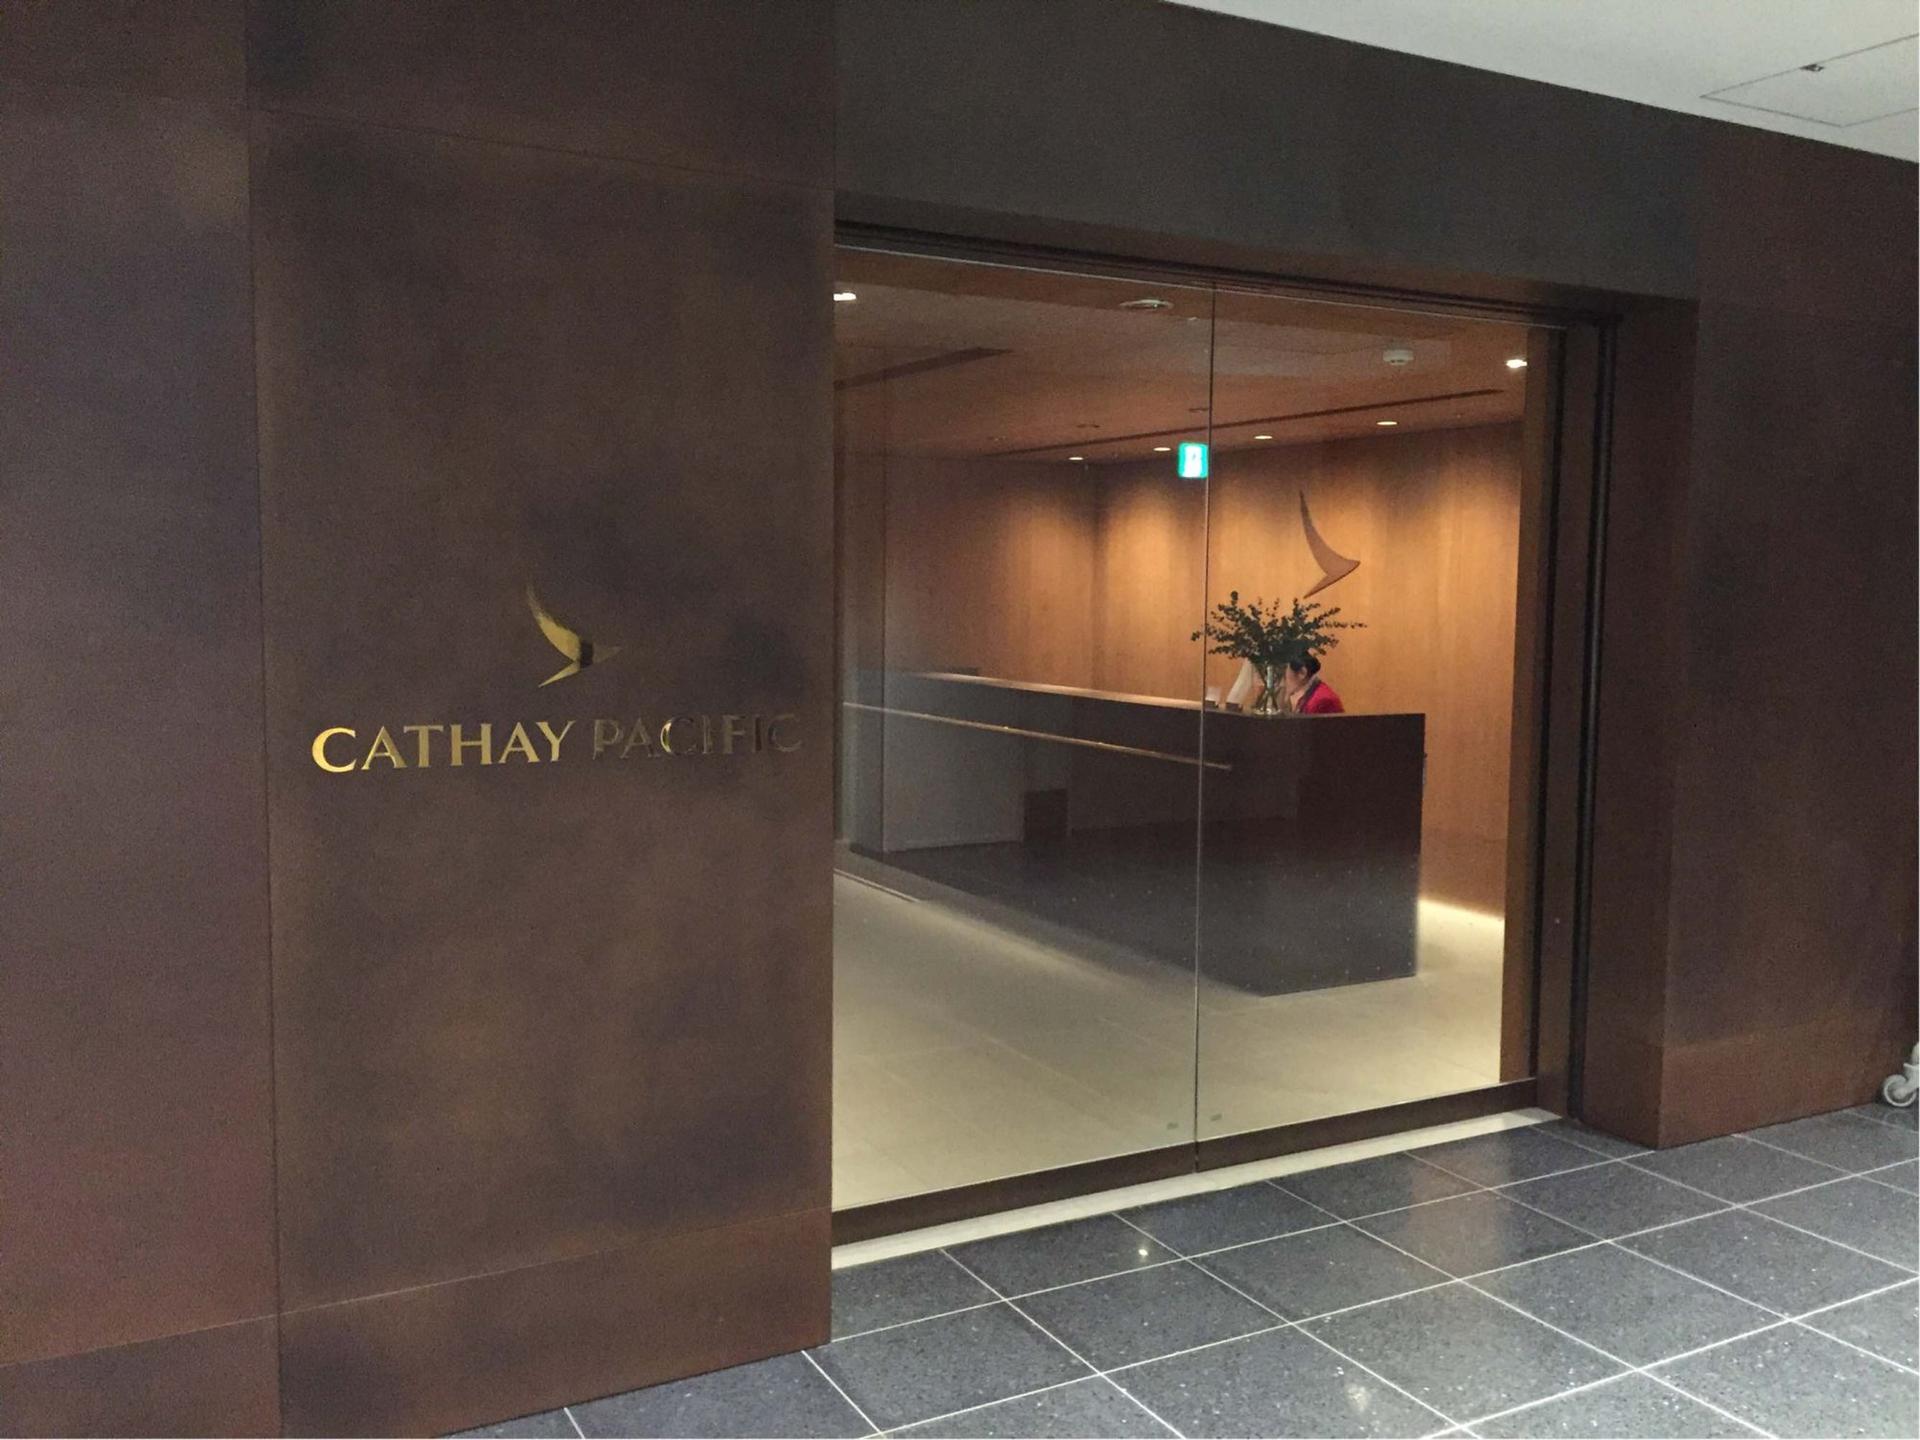 Cathay Pacific Lounge image 12 of 49